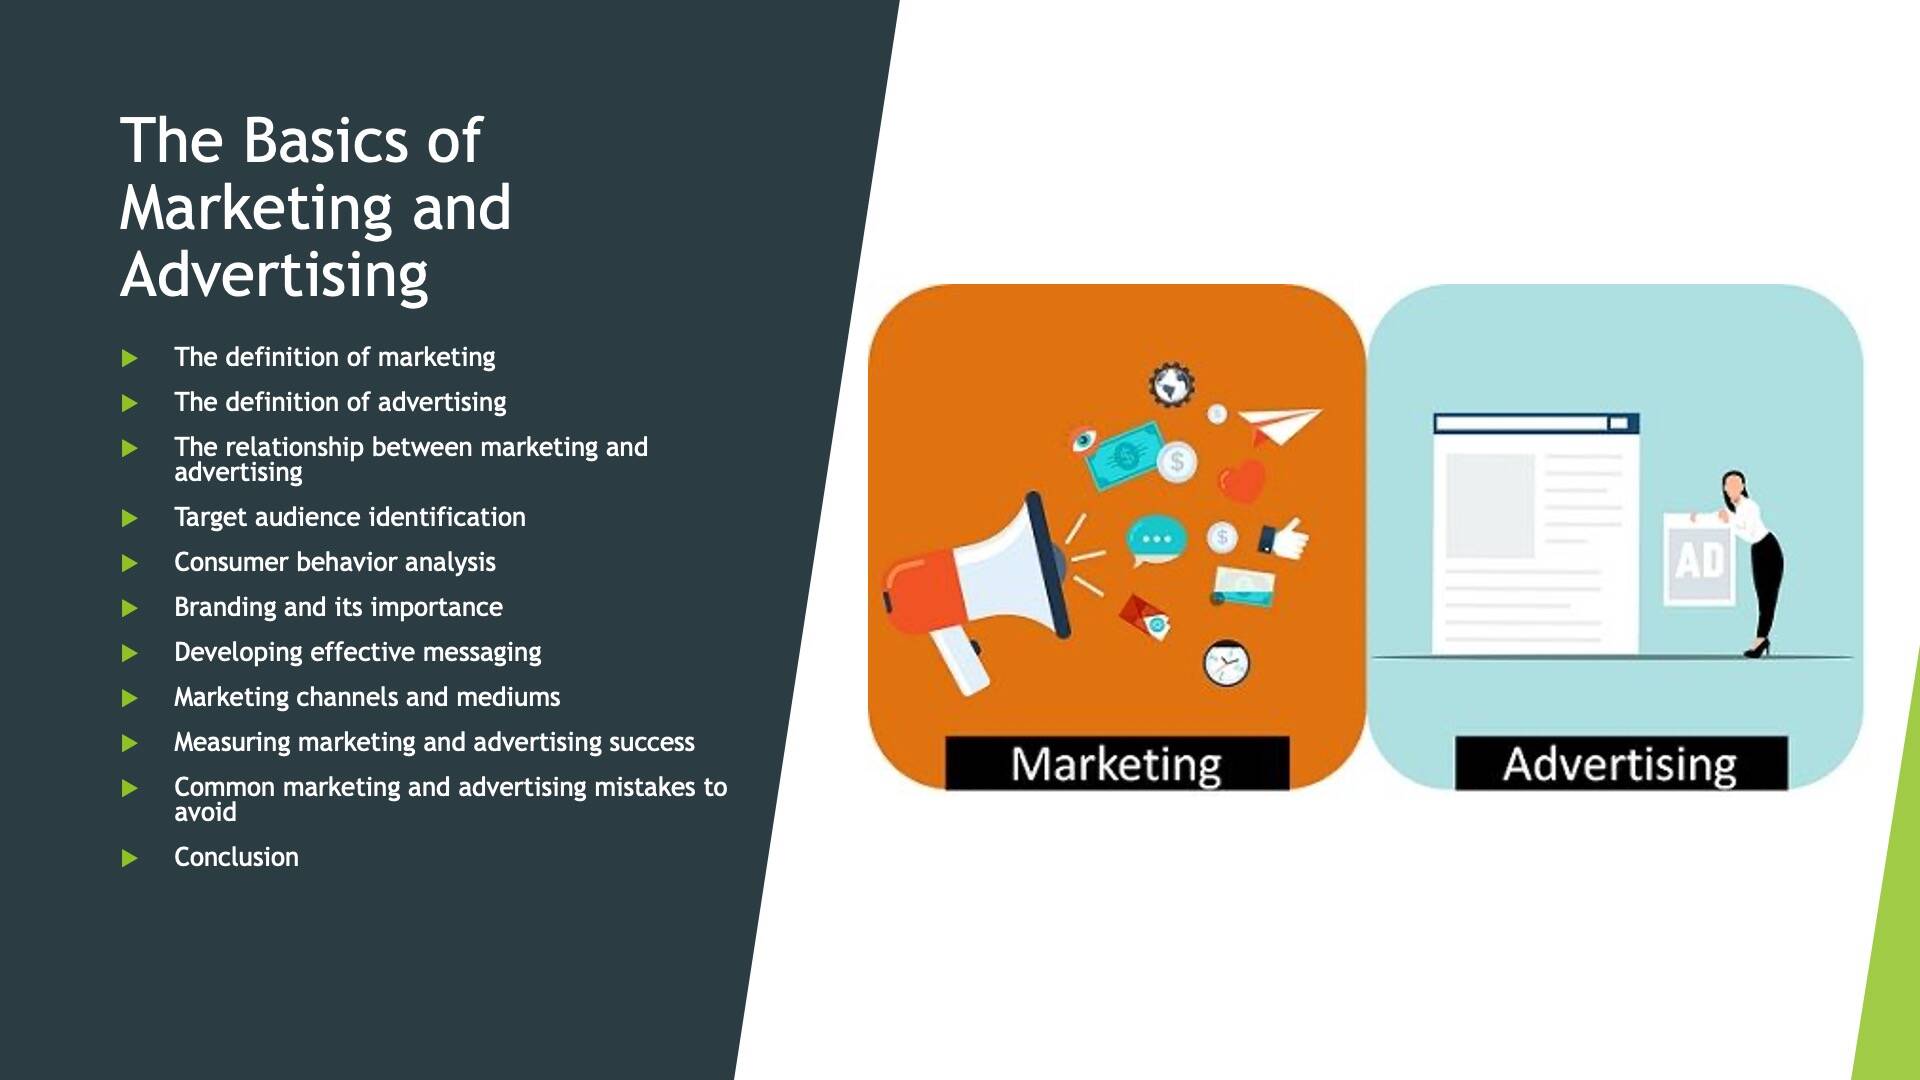 The basics of marketing and advertising